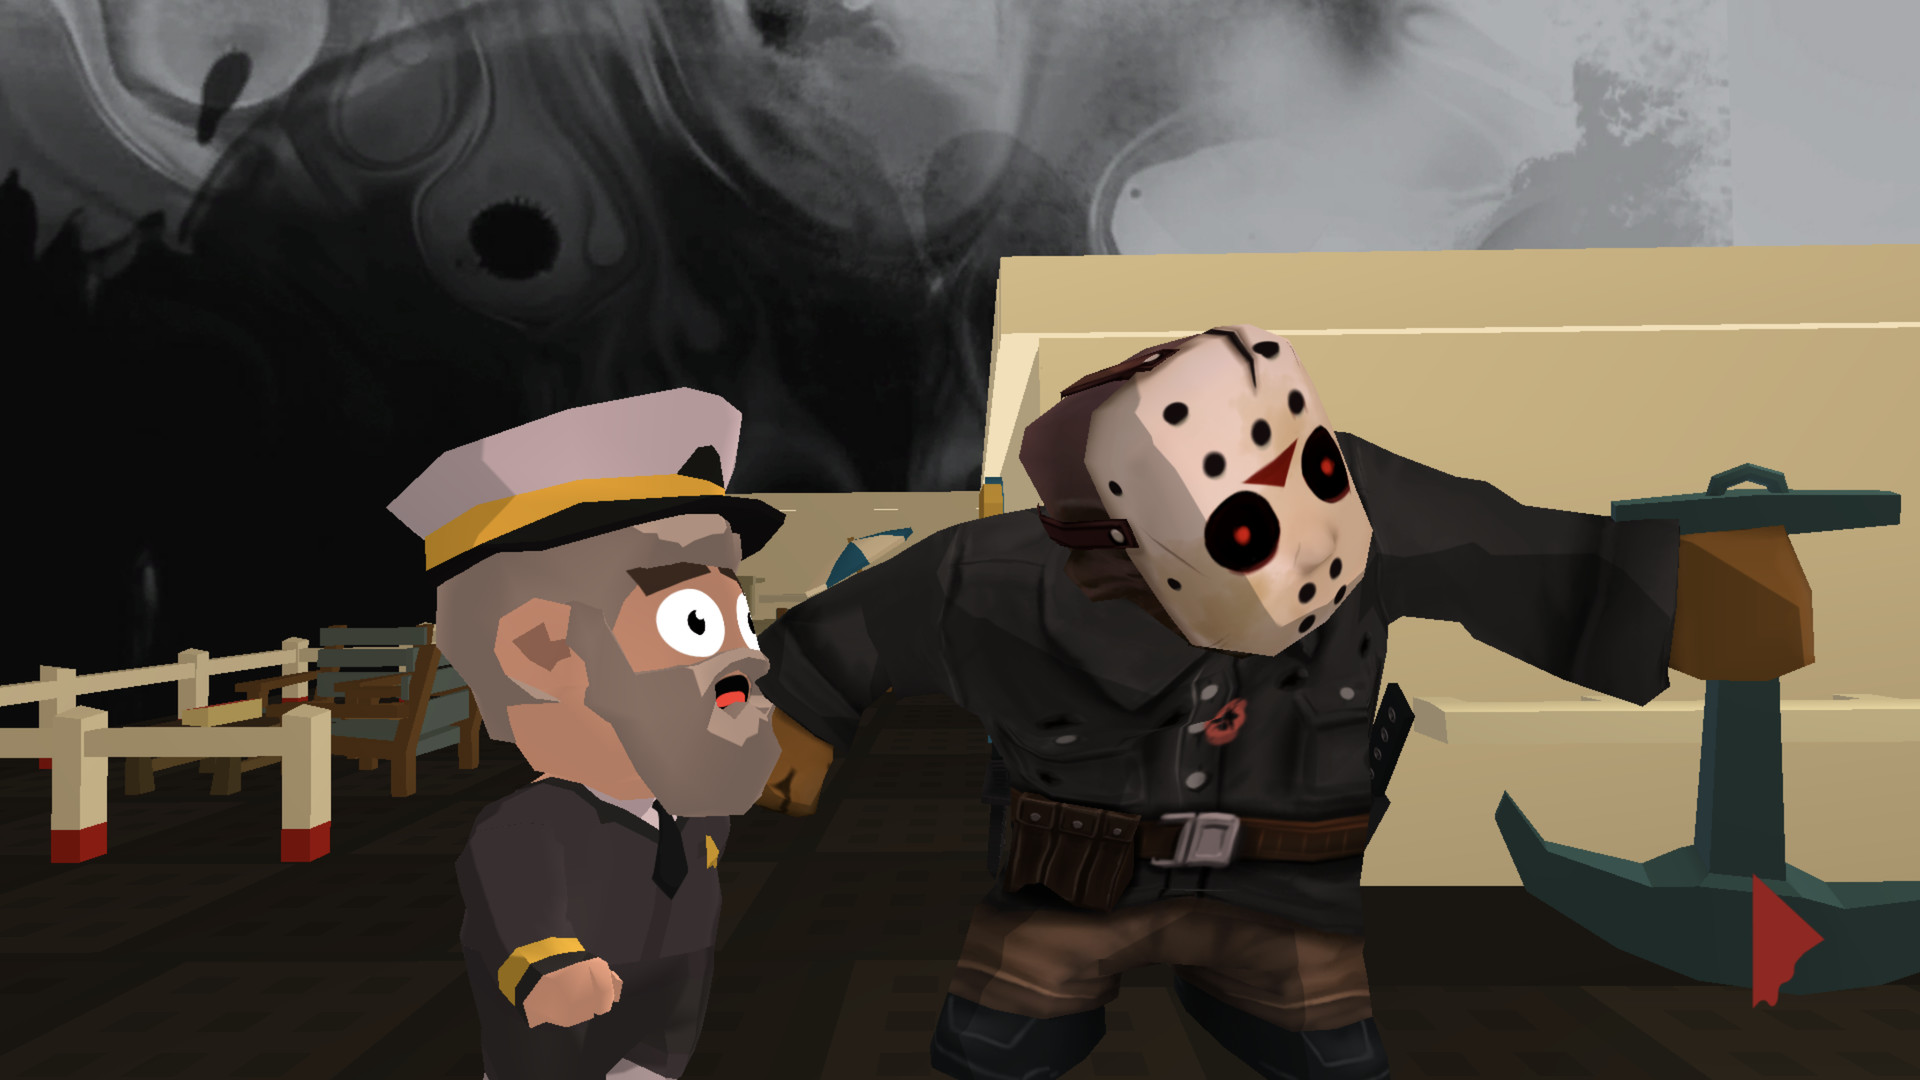 wound itself Overview Friday the 13th: Killer Puzzle on Steam